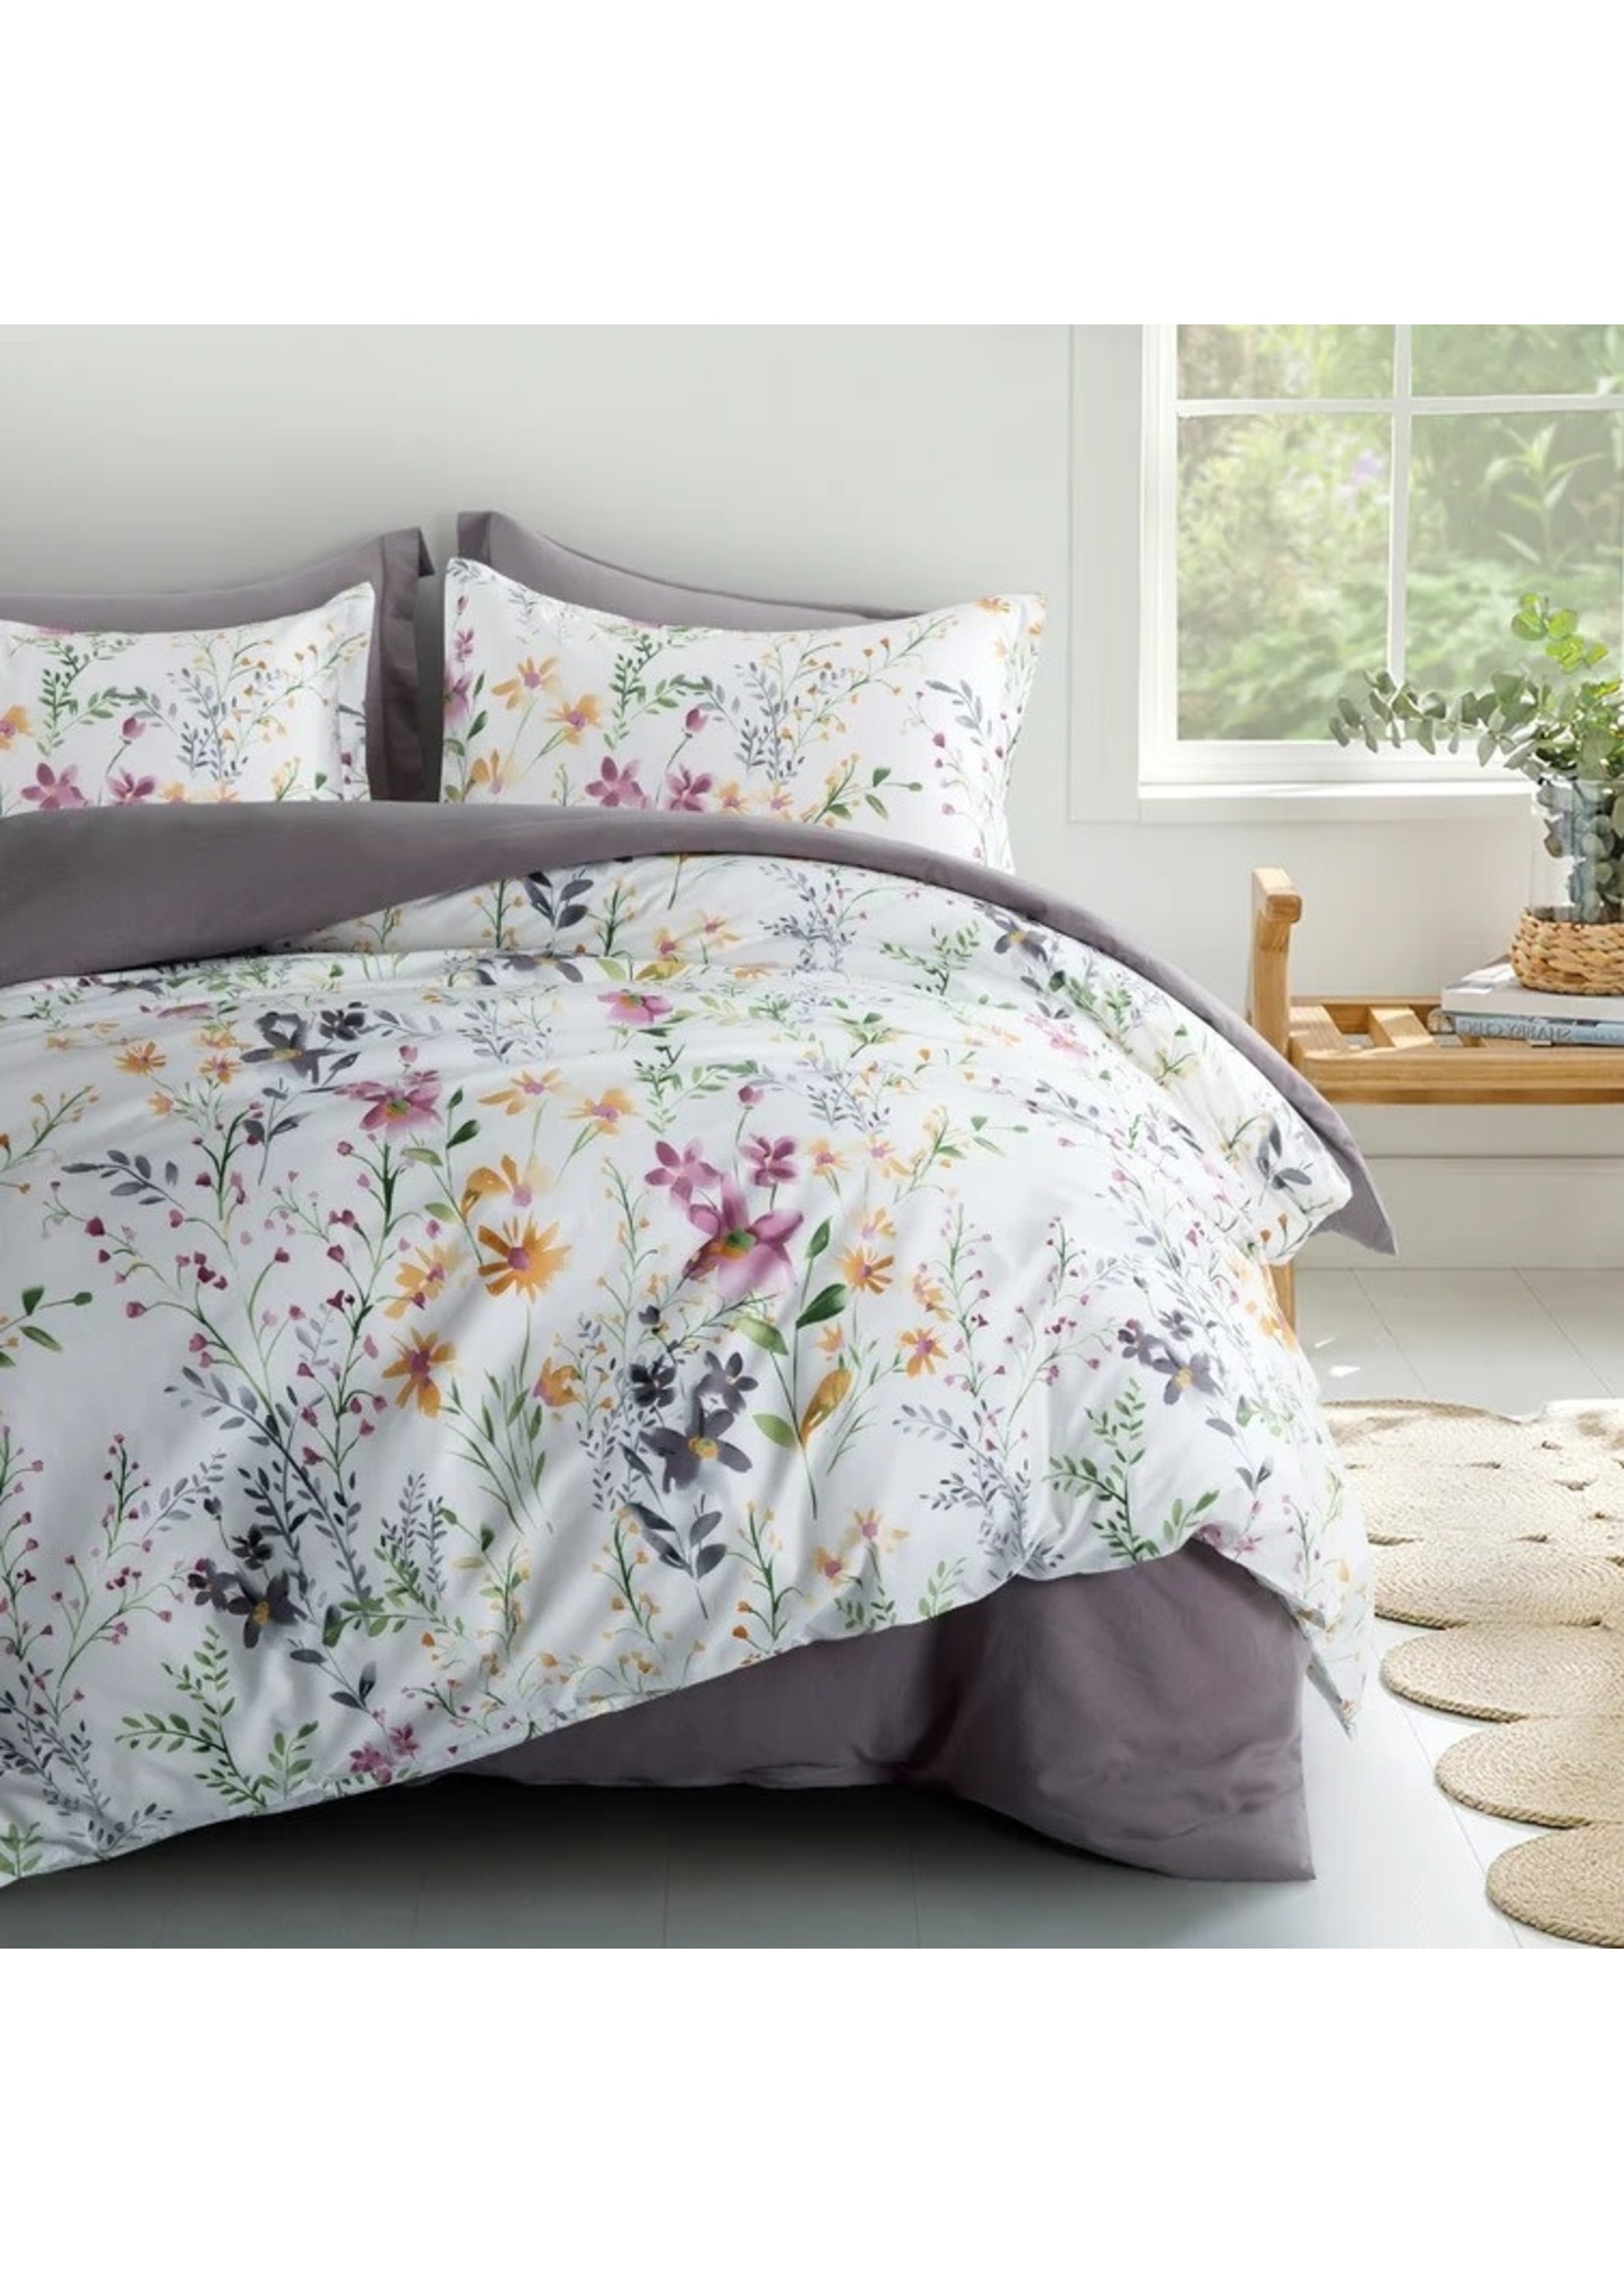 *Oversized King - Alysa Watercolor Windflower Painted Duvet Cover Set - Final Sale